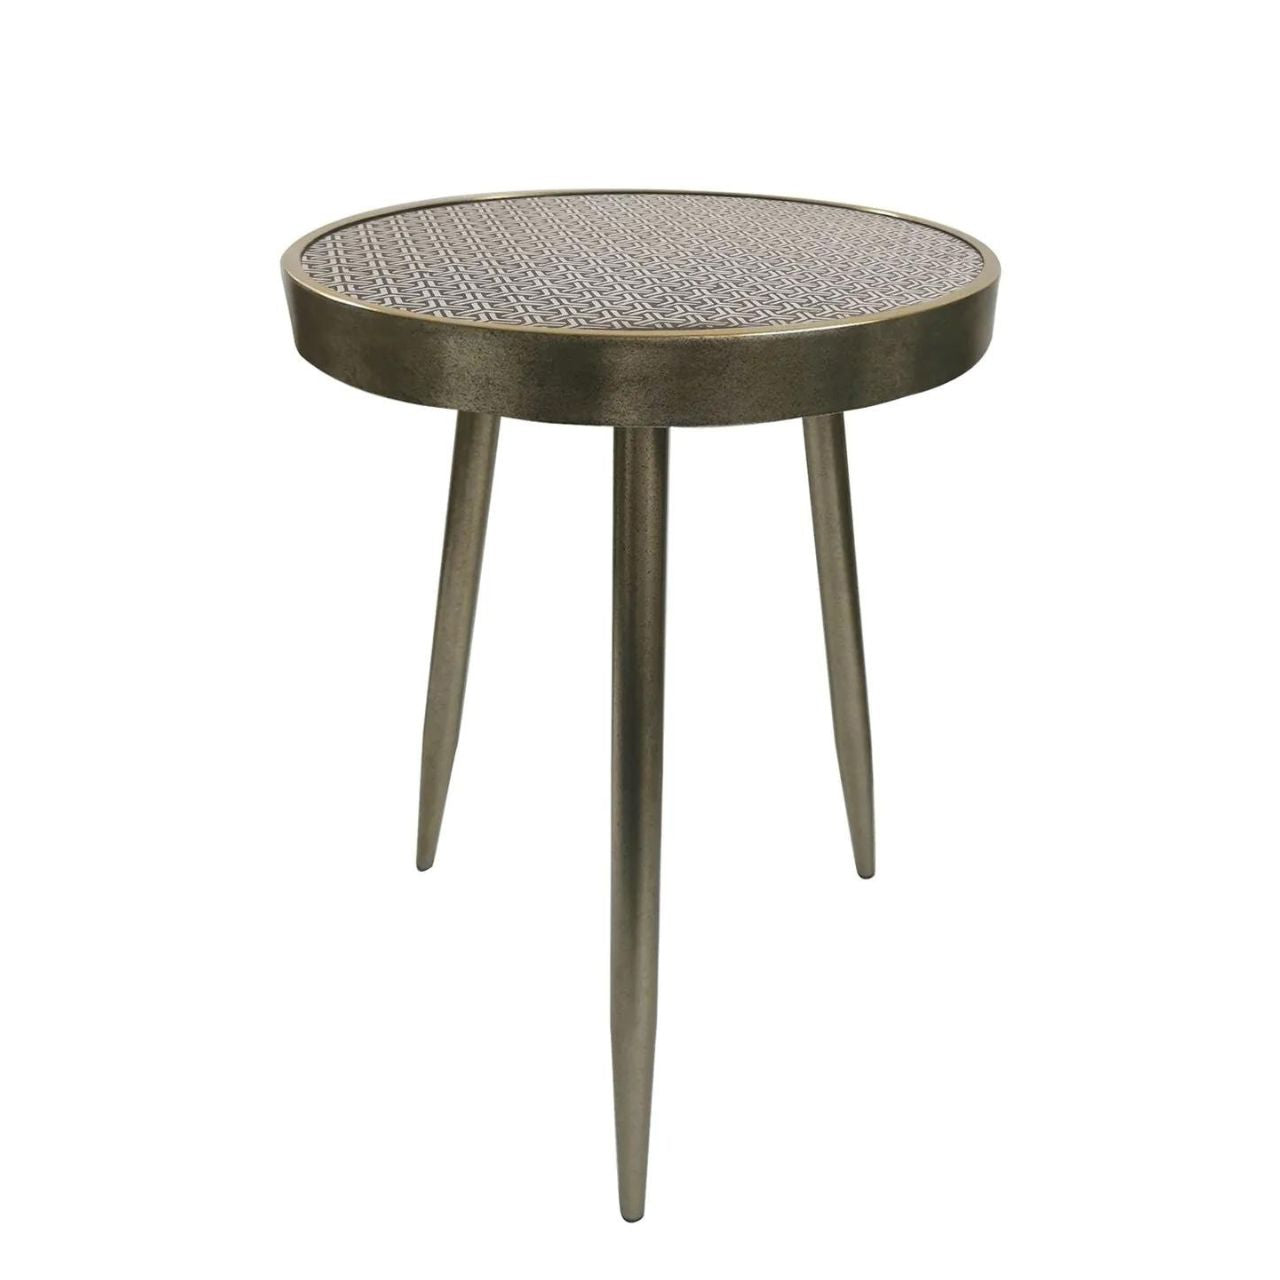 Adelina Table by Mindy Brownes Interiors  The Mindy Brownes Interiors Adelina Table